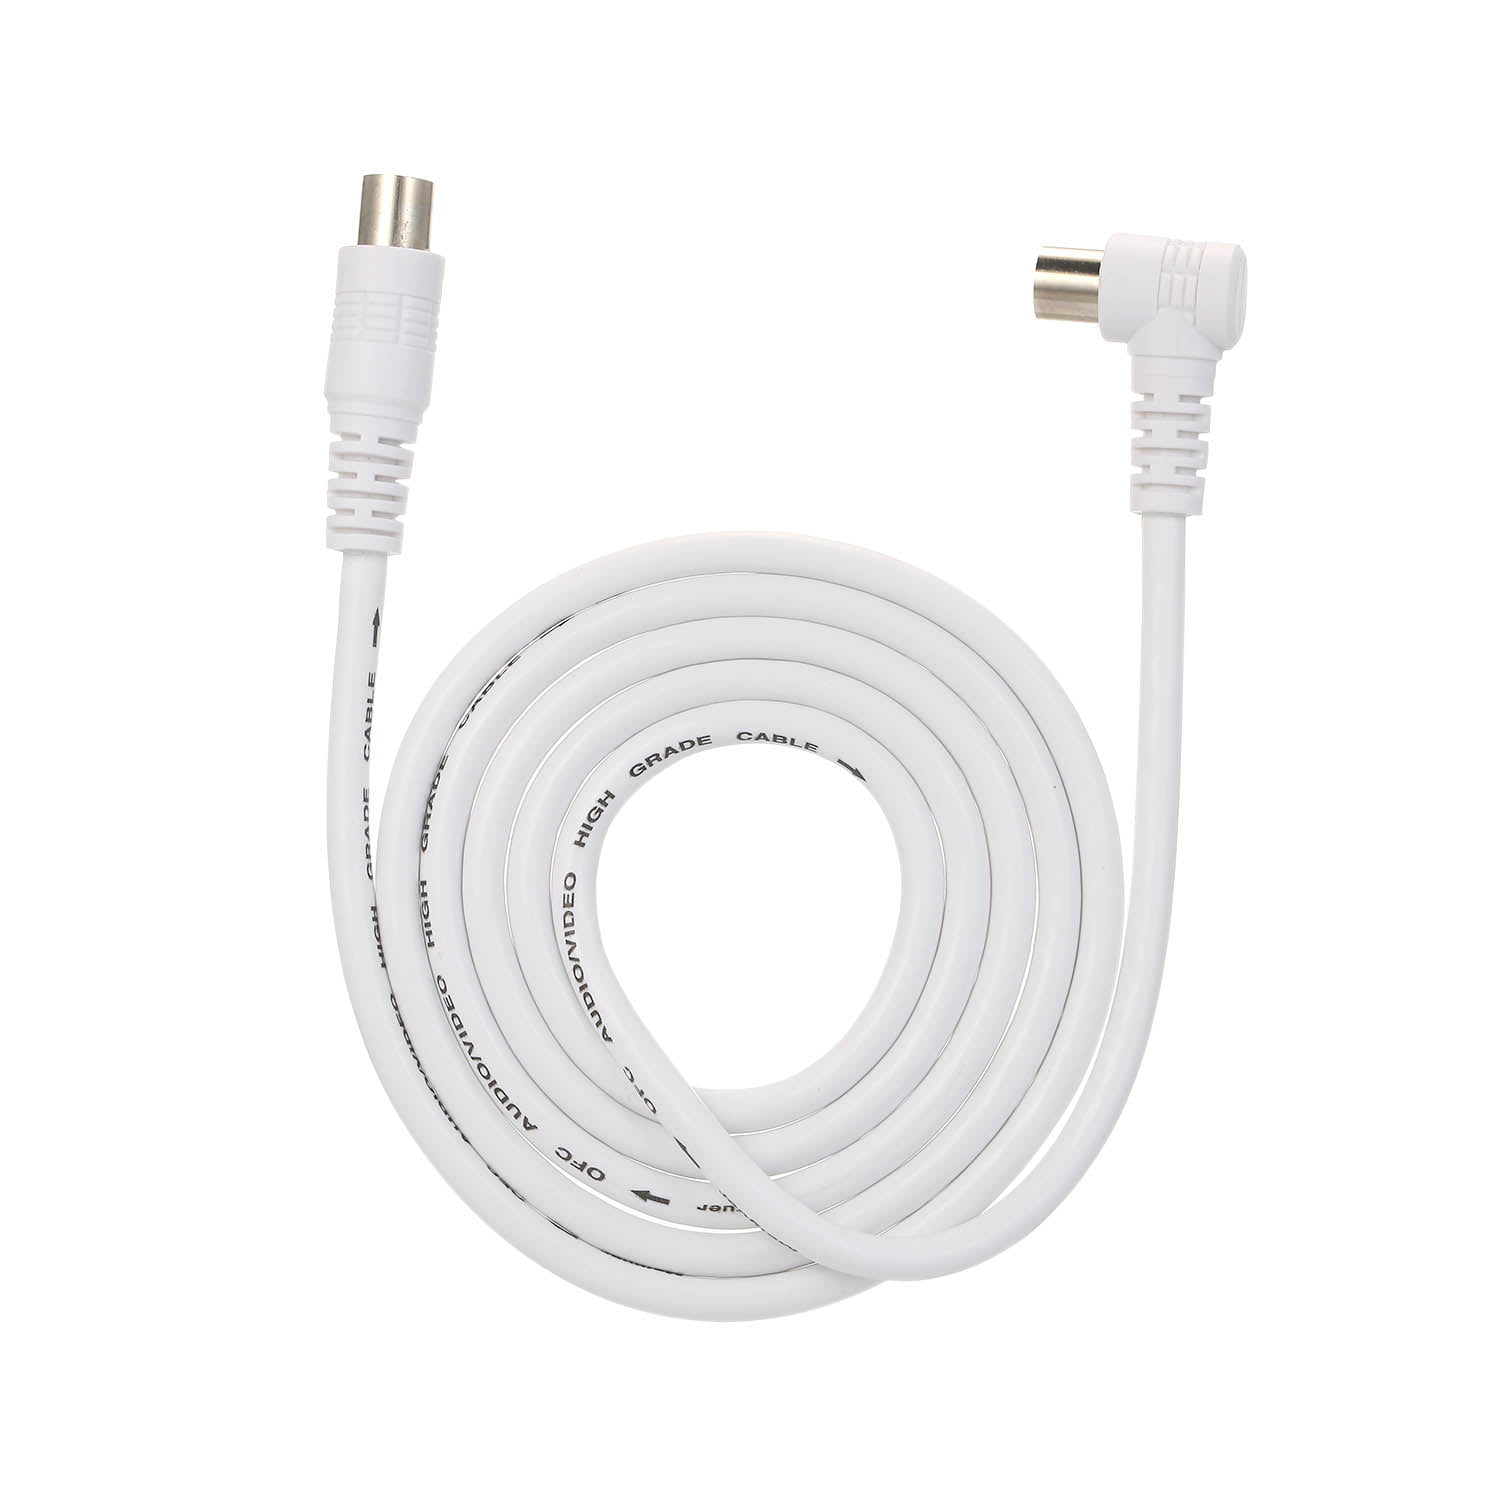 Maincore 1m Long TV RF Extension Cable Male to Female with Male to Male Coupler Adapter Coax Cord Gold Flashed Contacts Freeview Aerial Antenna Lead 1m, White 